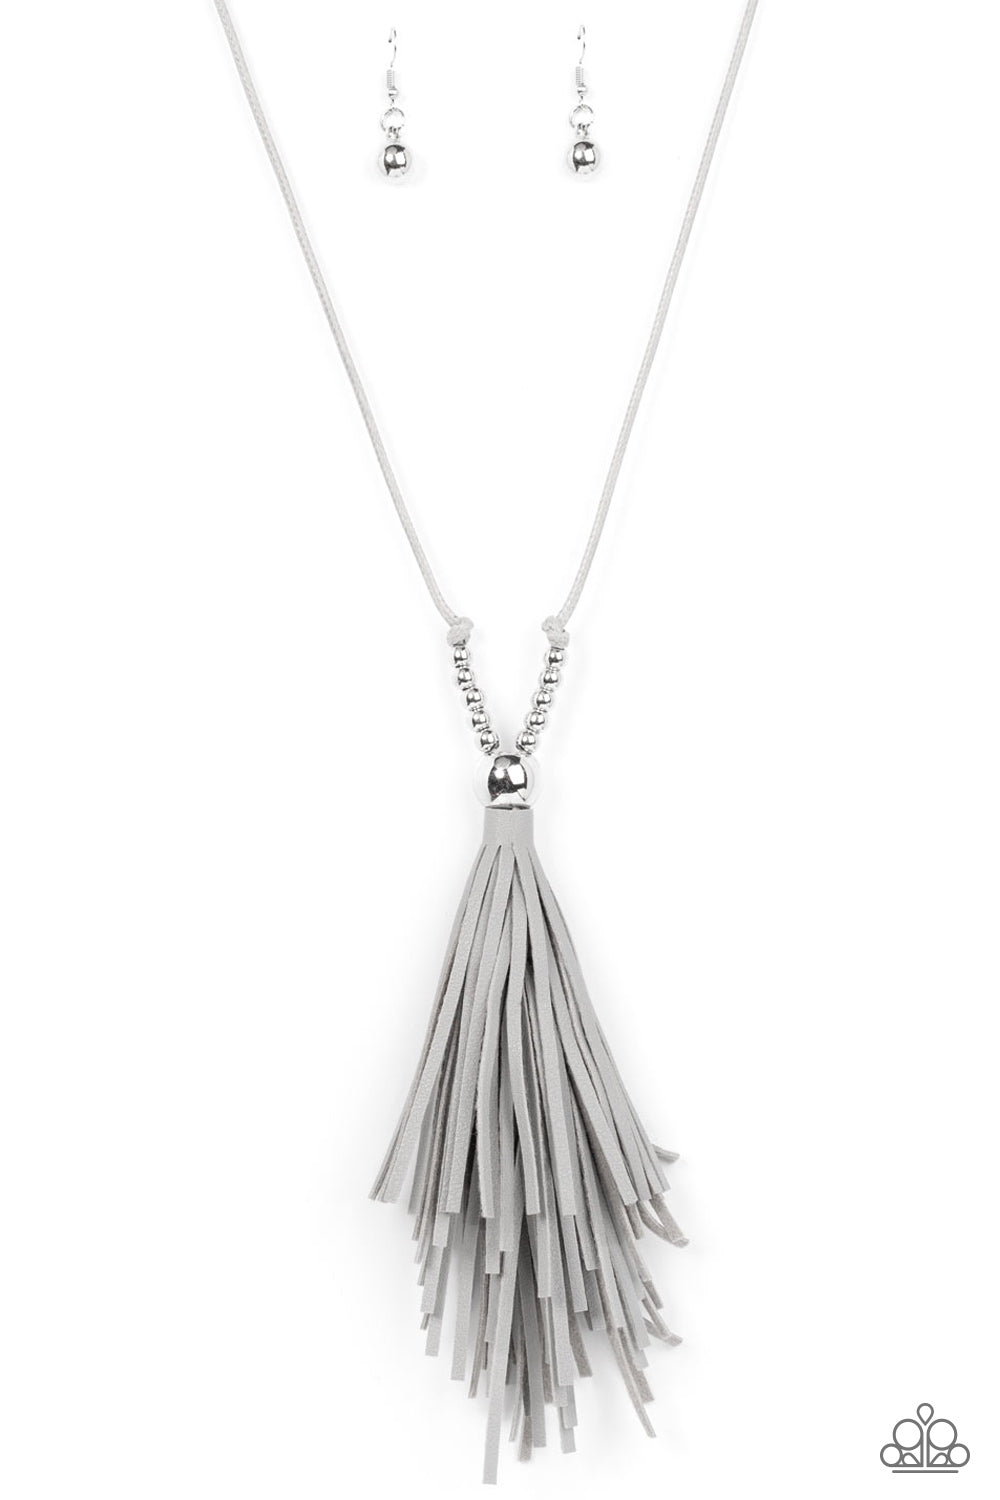 Paparazzi Accessories - A Clean Sweep - Silver Tassel Necklaces an exaggerated Ultimate Gray leather tassel flares out from the bottom of a stack of silver beads knotted in place at the bottom of shiny Ultimate Gray cording, resulting in a dramatically rustic pendant. Features an adjustable clasp closure.  Sold as one individual necklace. Includes one pair of matching earrings.